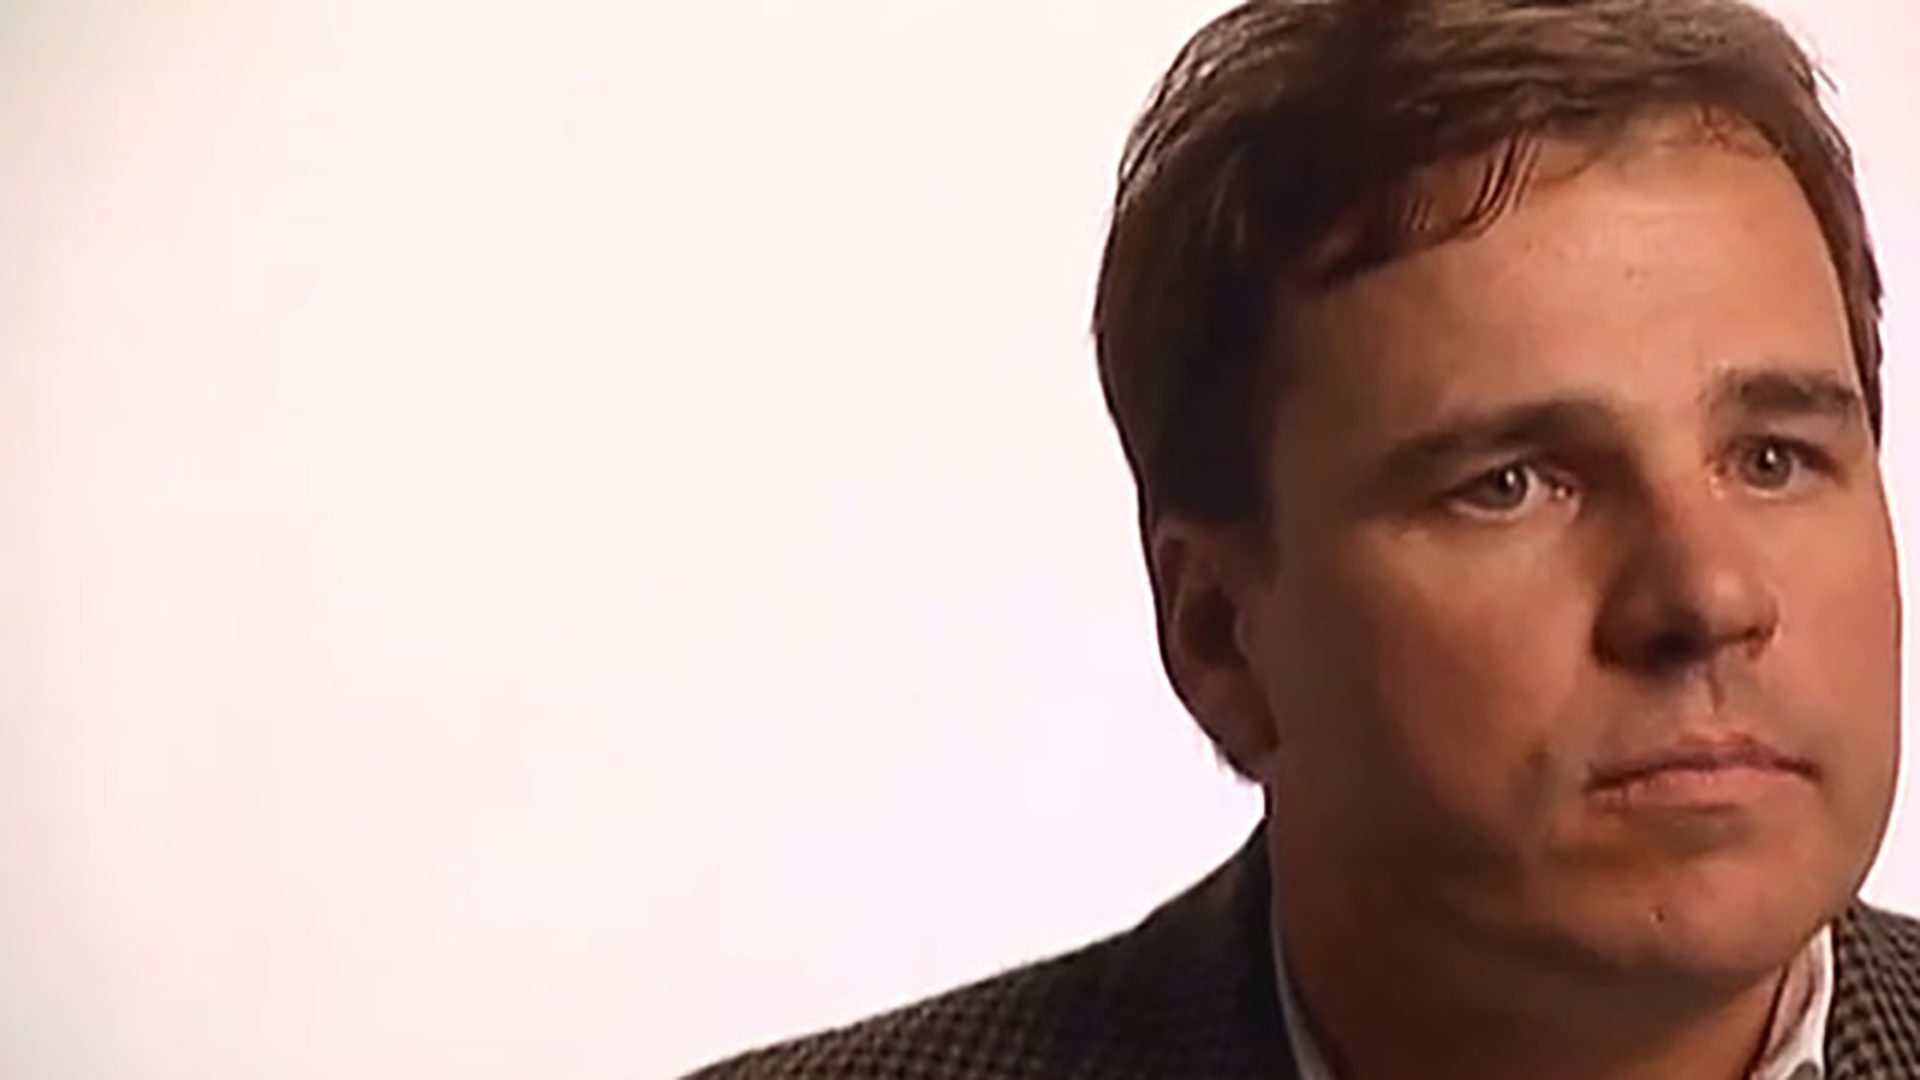 A close-up image of an adult man being interviewed against a white background